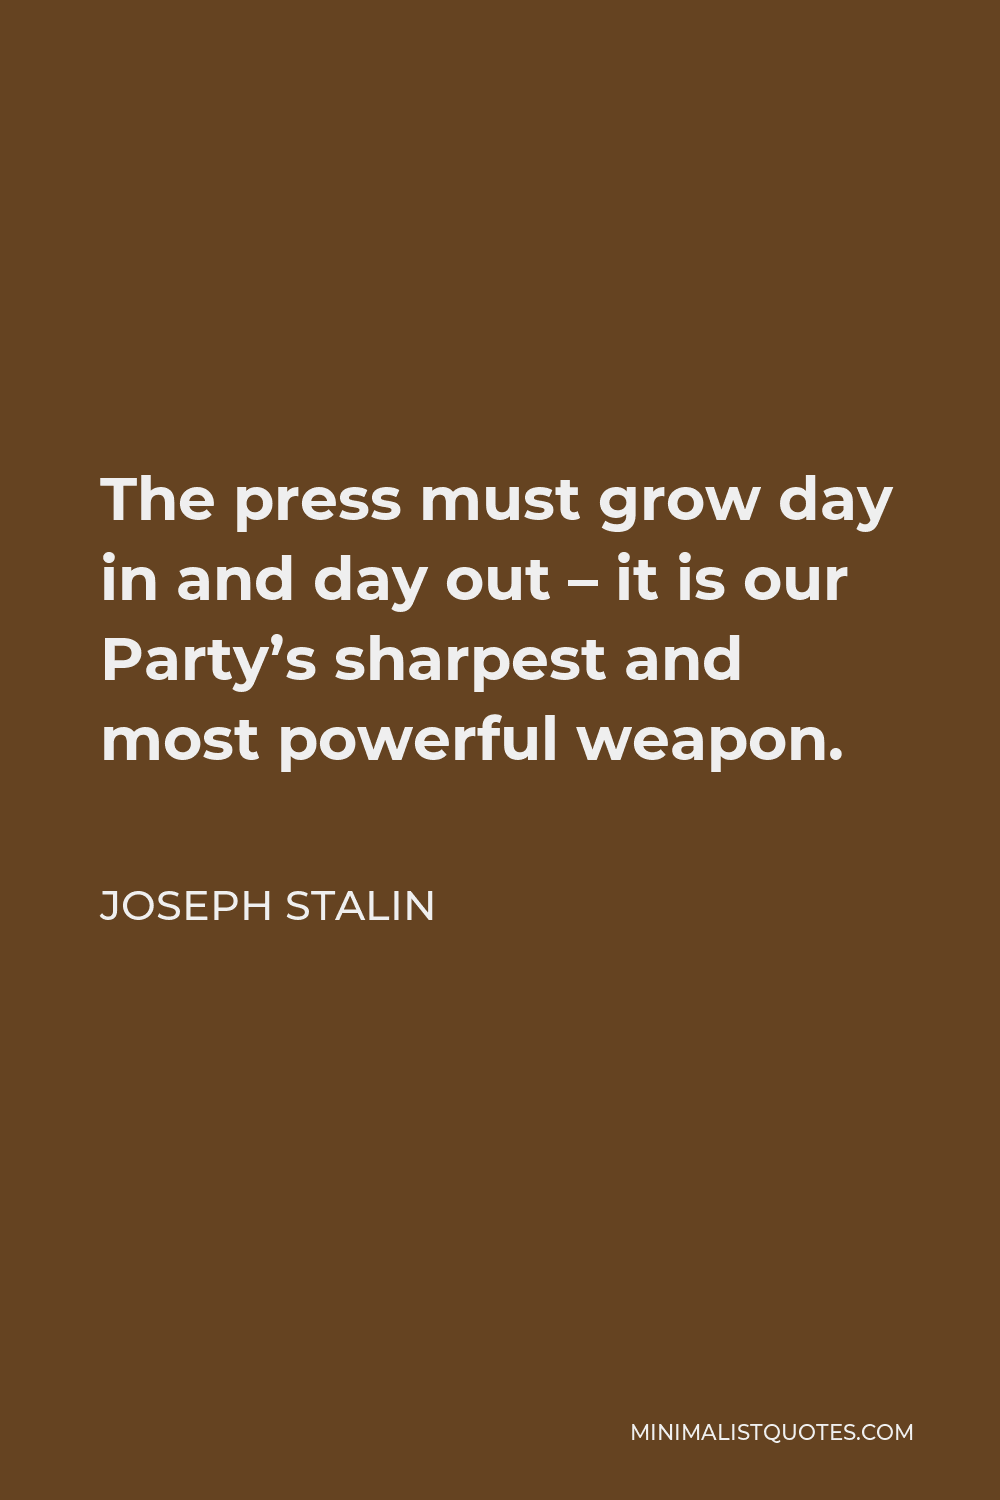 Joseph Stalin Quote - The press must grow day in and day out – it is our Party’s sharpest and most powerful weapon.